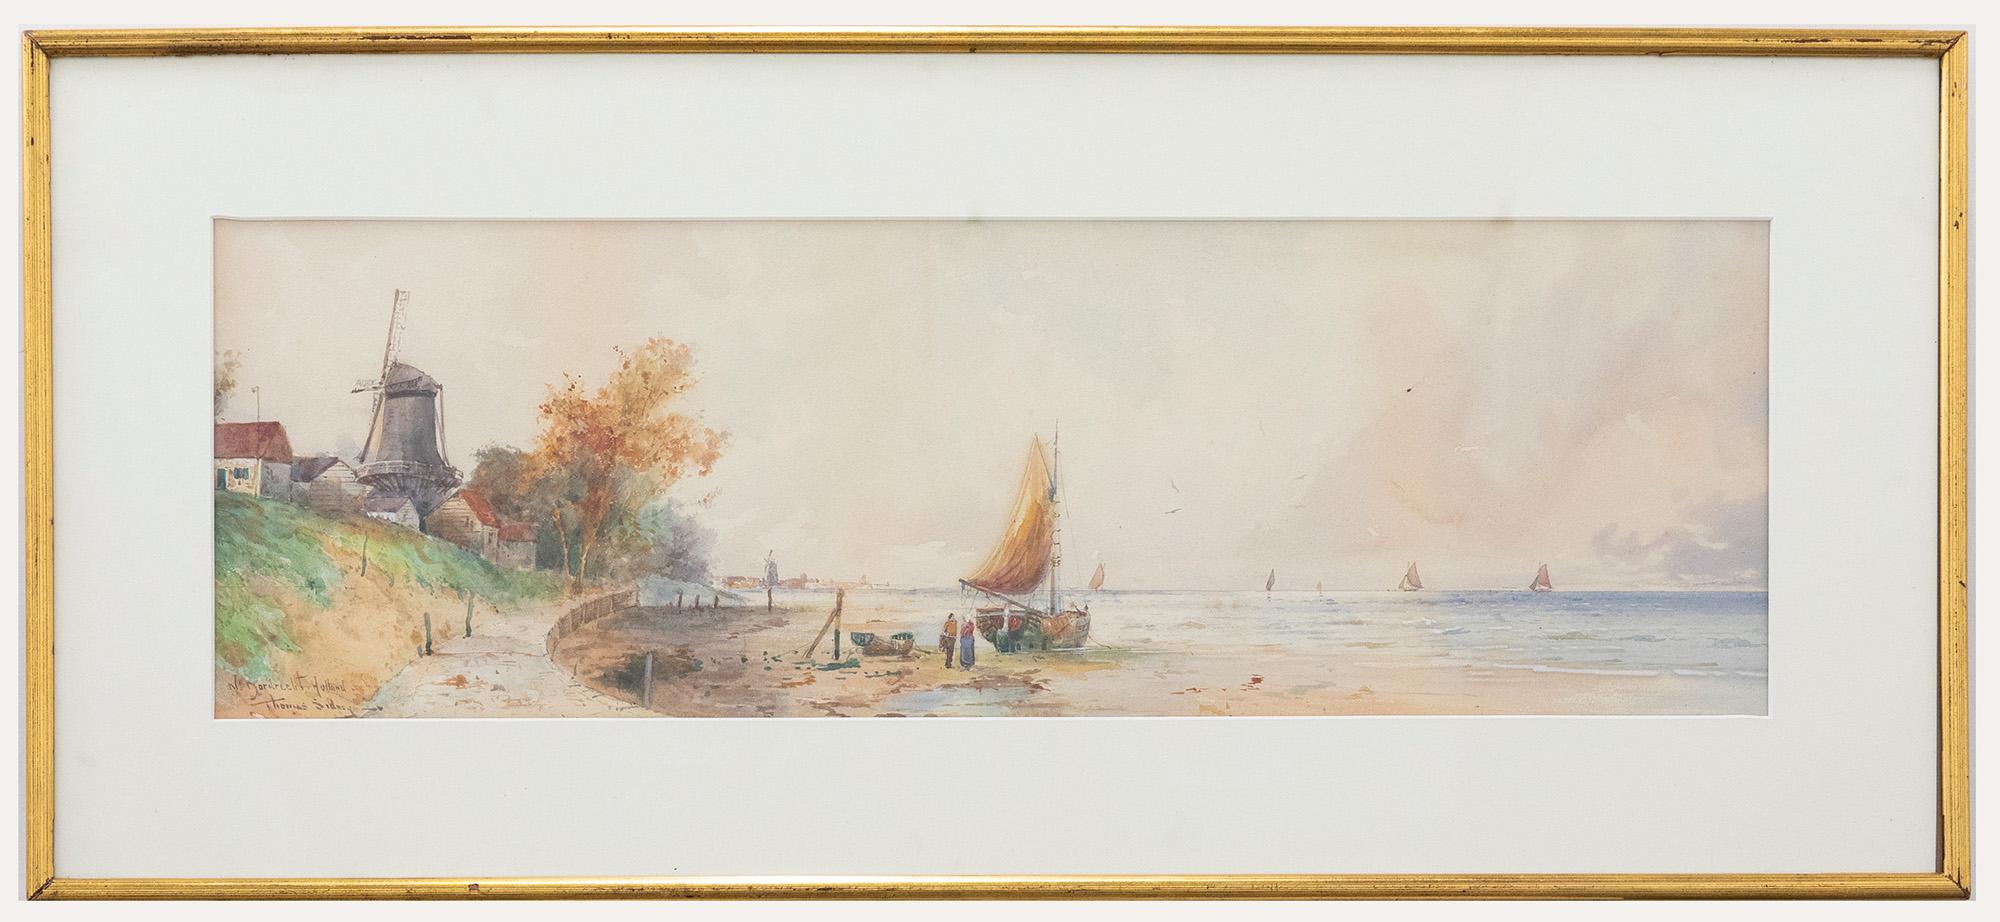 Thomas Sidney Cooper Figurative Art - Thomas Sidney - Framed Early 20th Century Watercolour, Seascape off Dordrecht